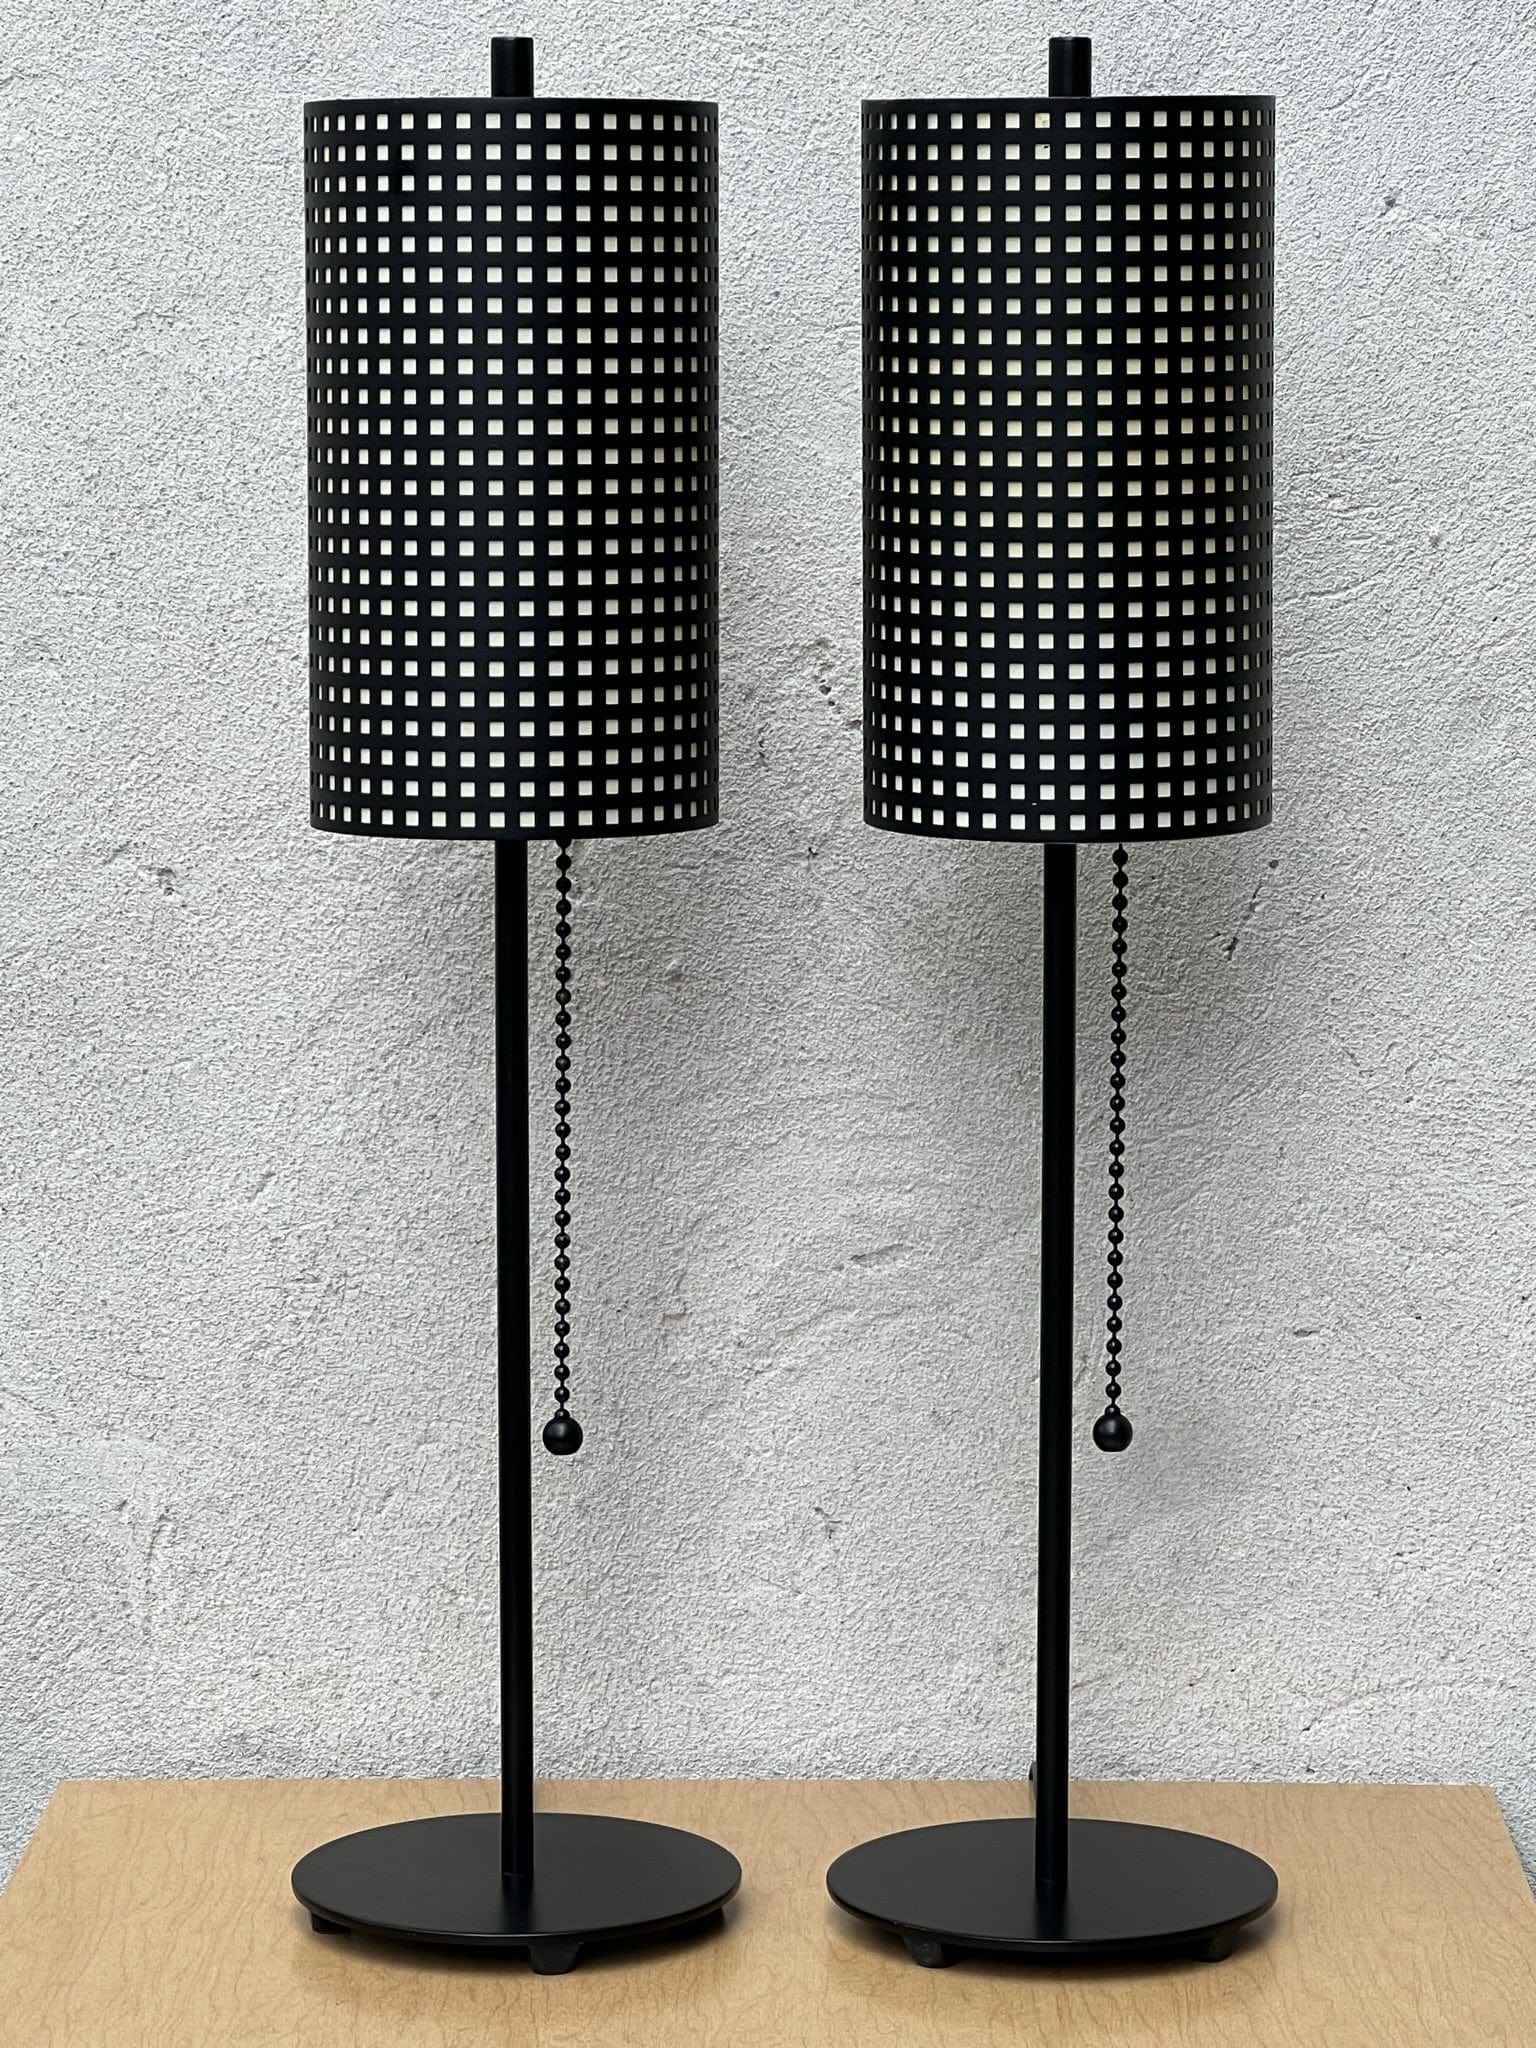 I Like Mike's Mid Century Modern table lamps Pair Slim Black Table Lamps by Kovacs with Metal Black & White Shades